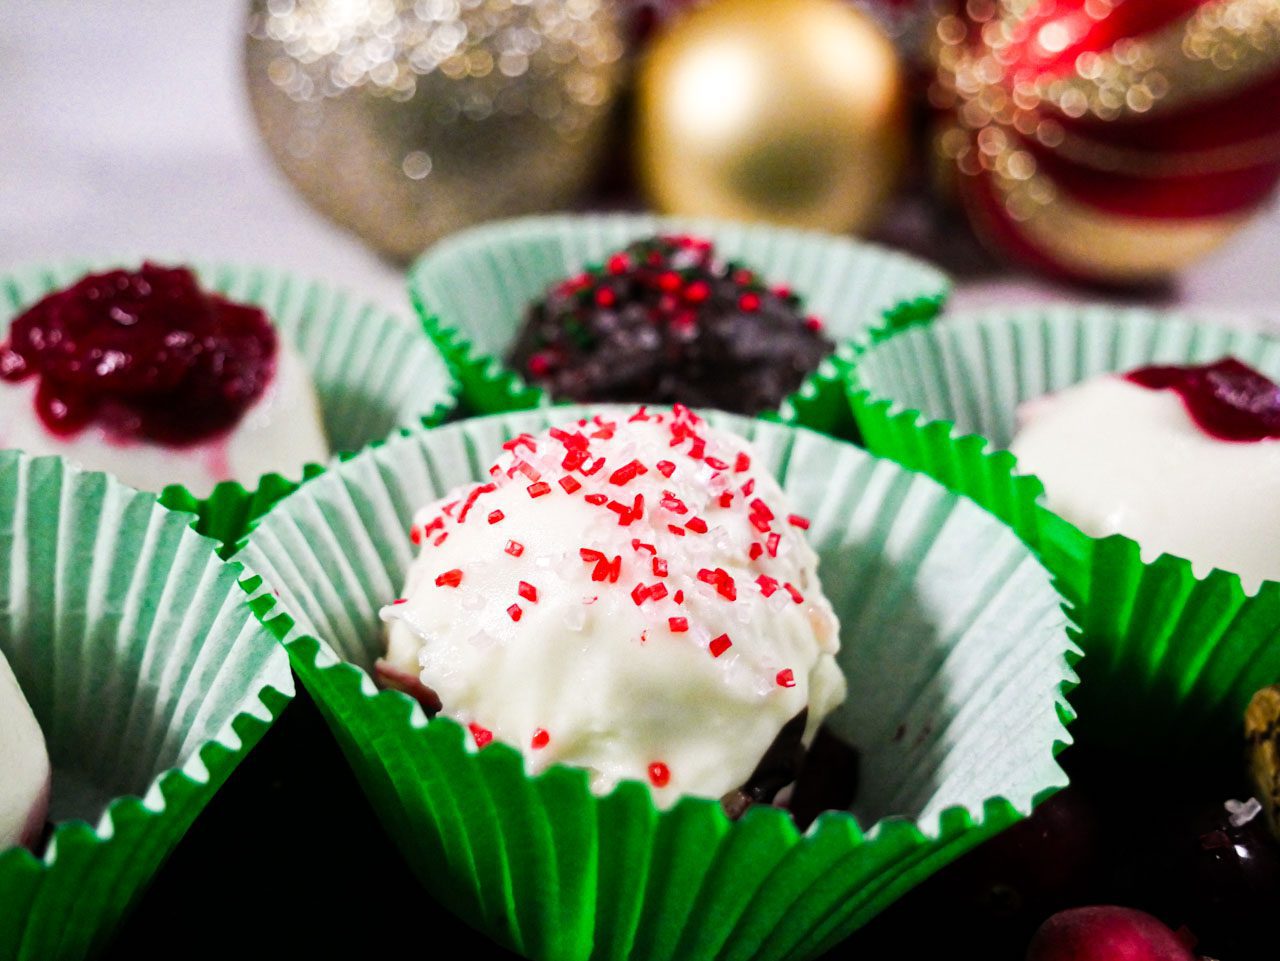 Cranberry gingerbread cake balls with varying decorations